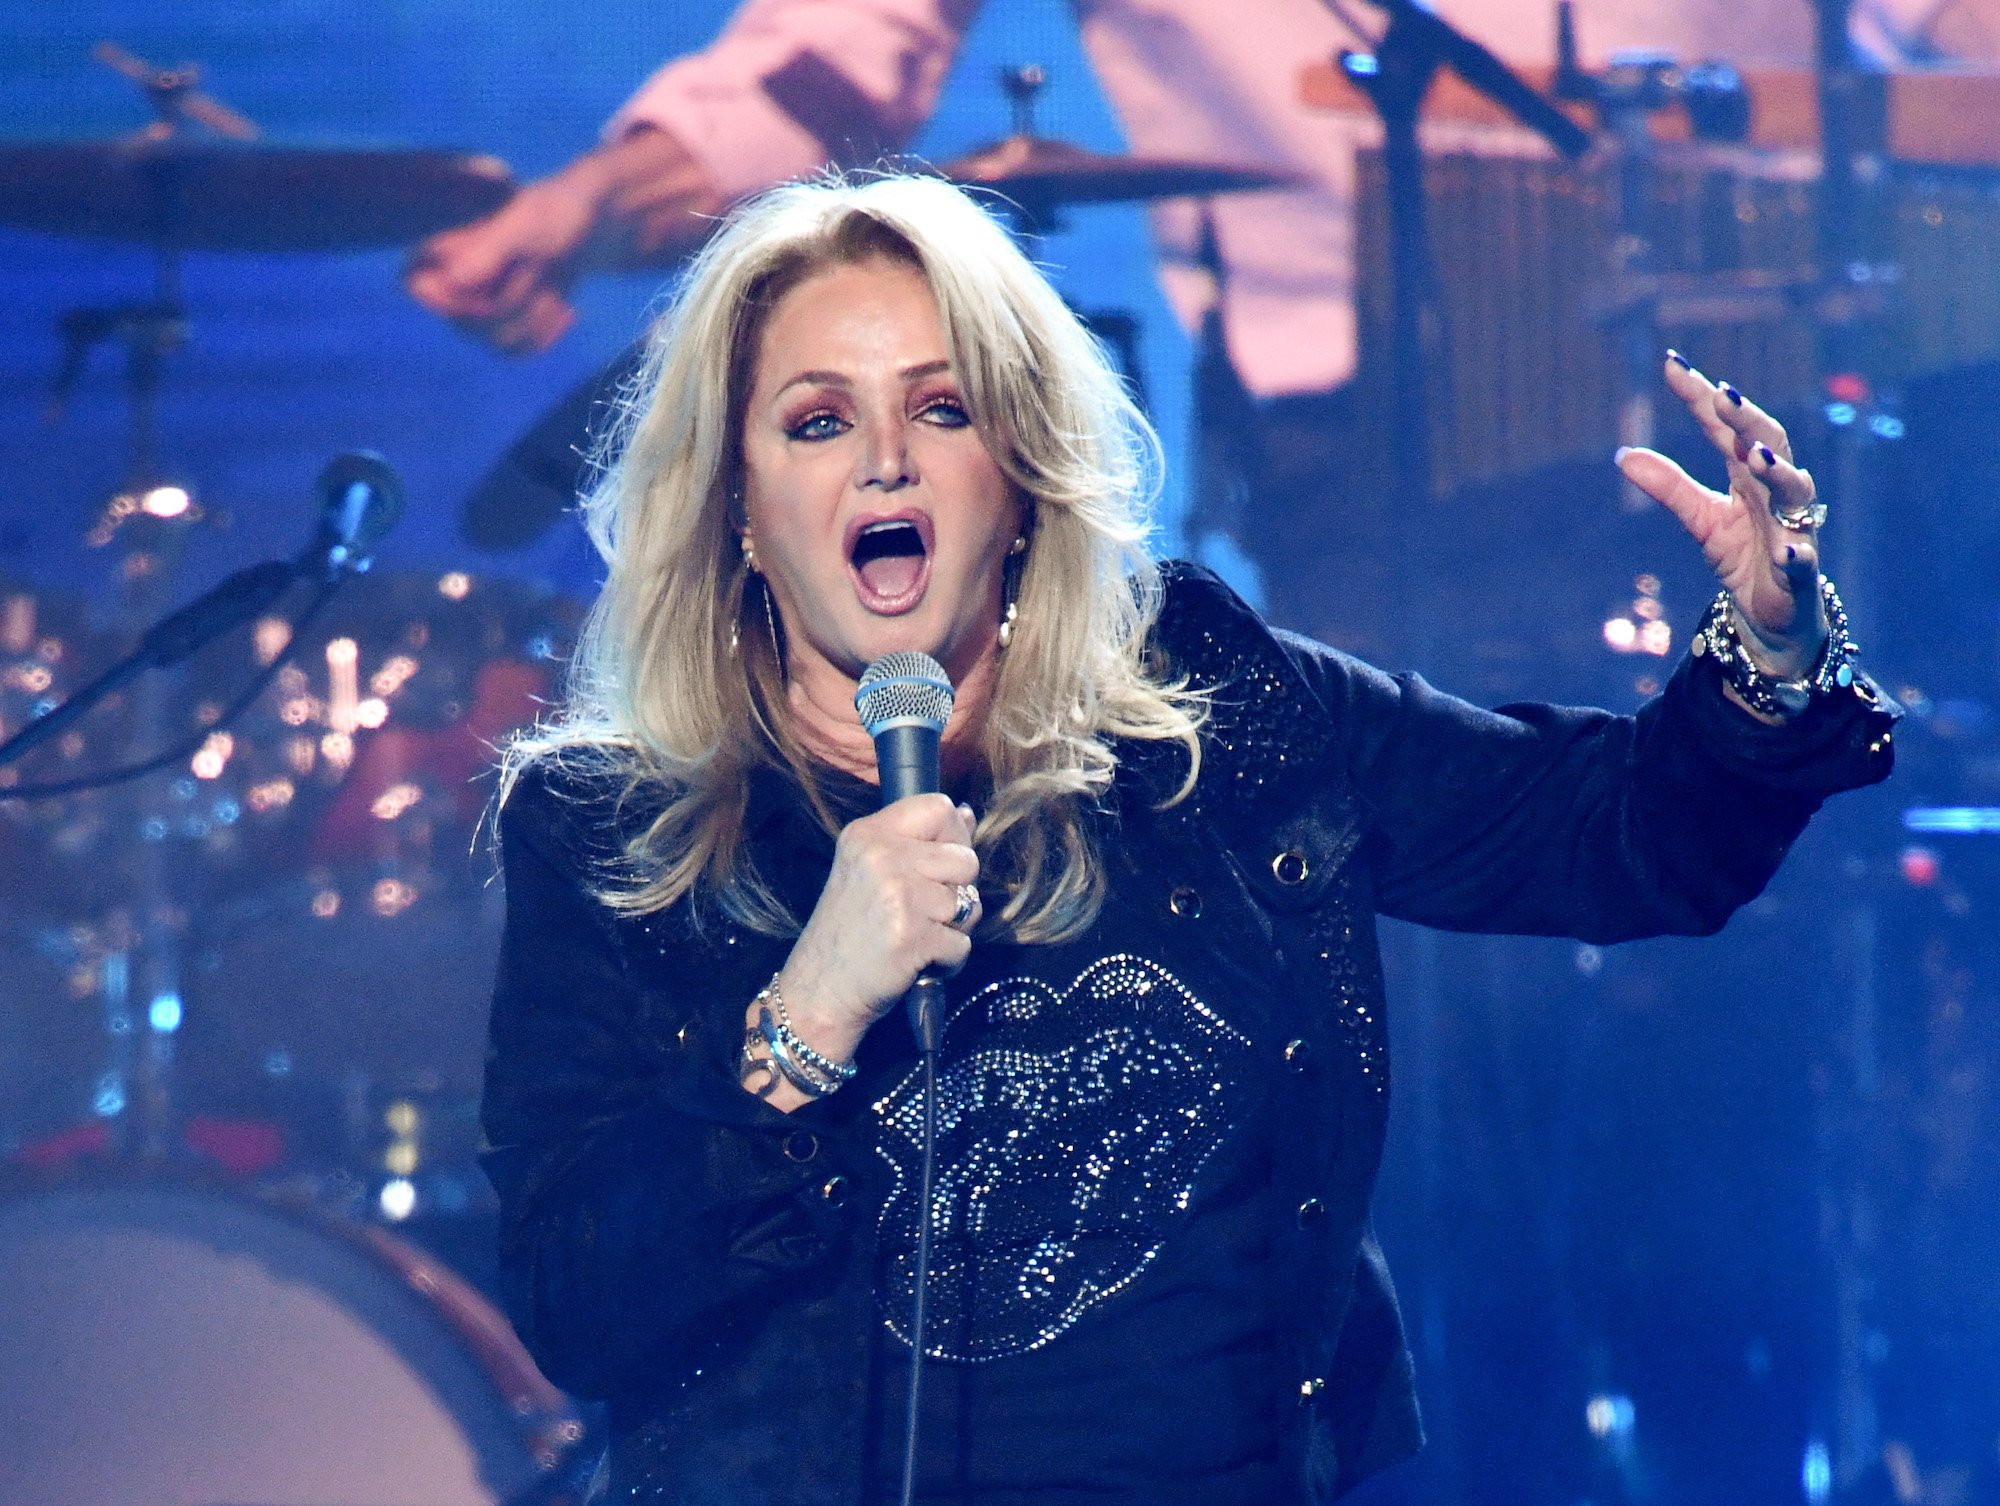 Bonnie Tyler performs on stage during Music For The Marsden 2020